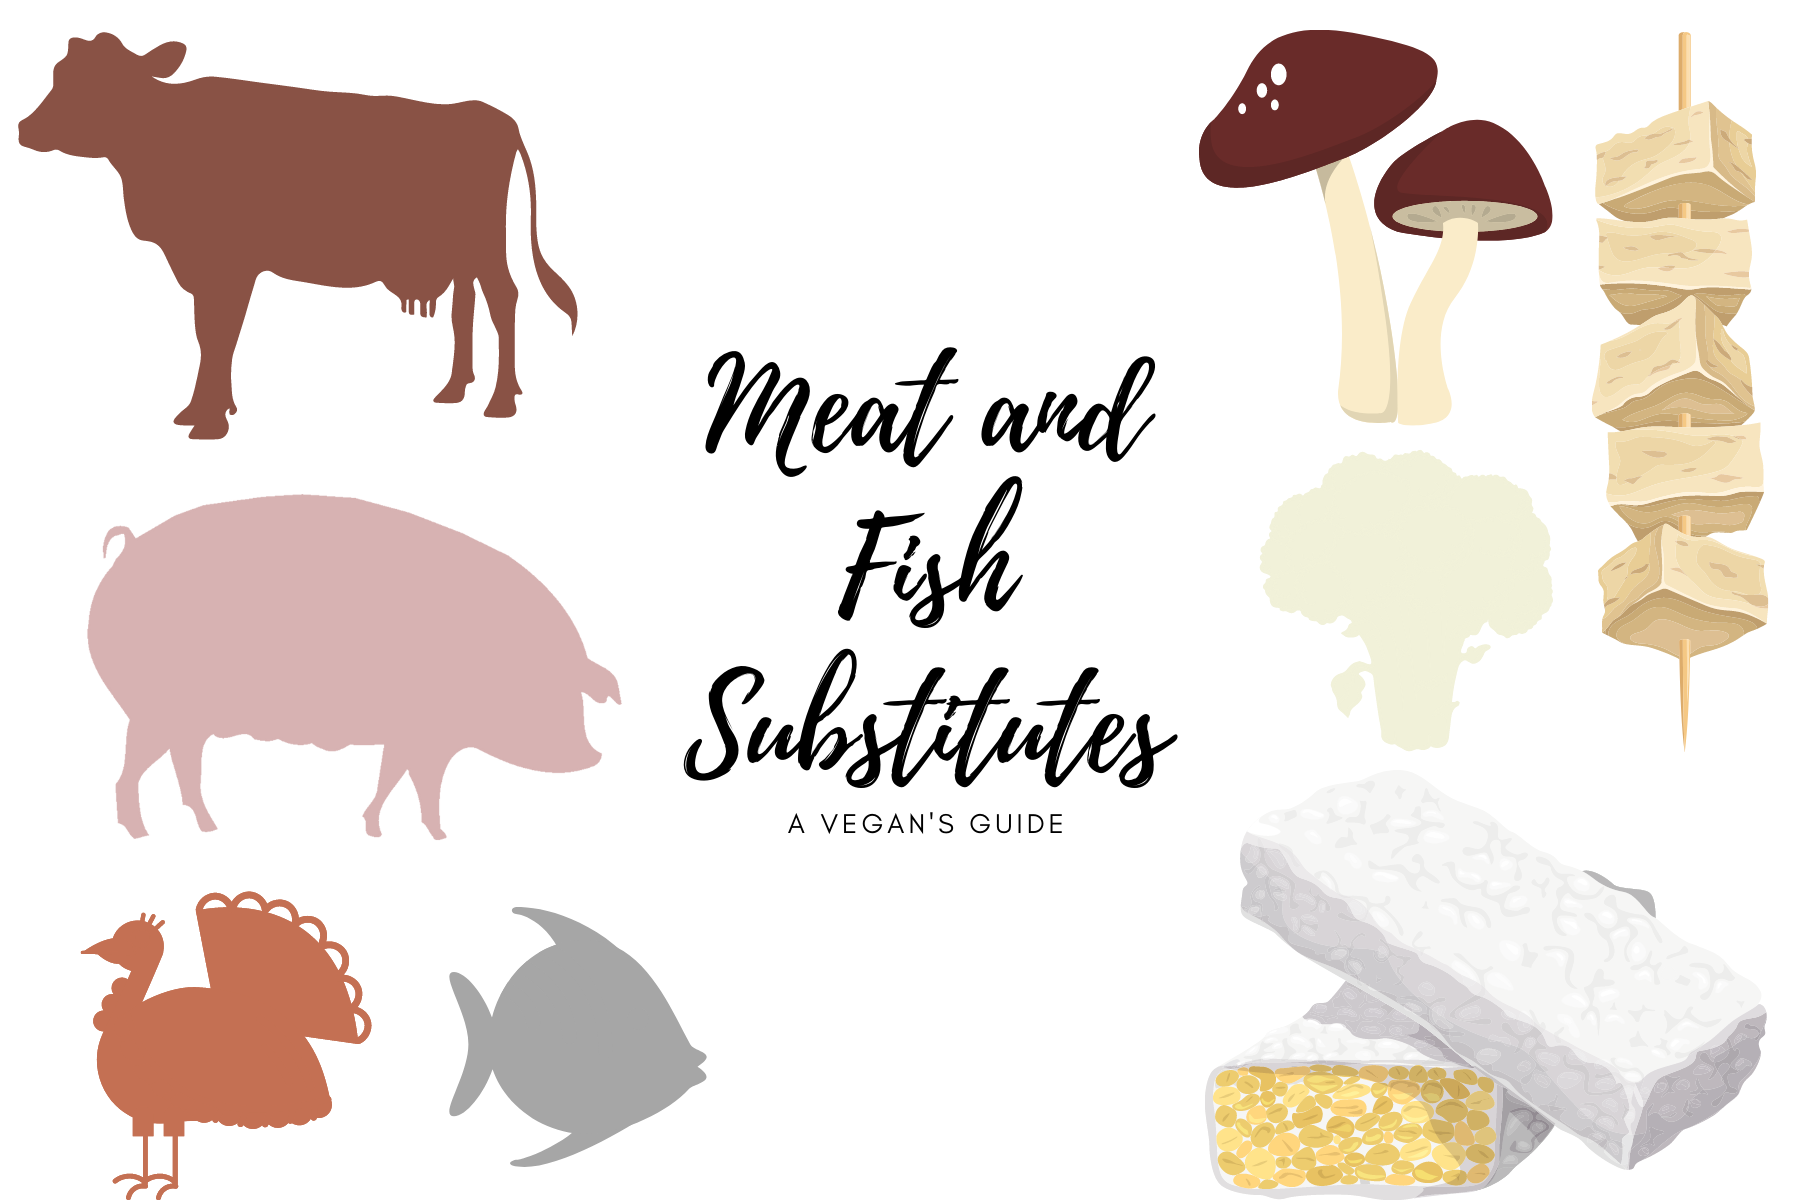 A vegan’s guide to meat and fish substitutes